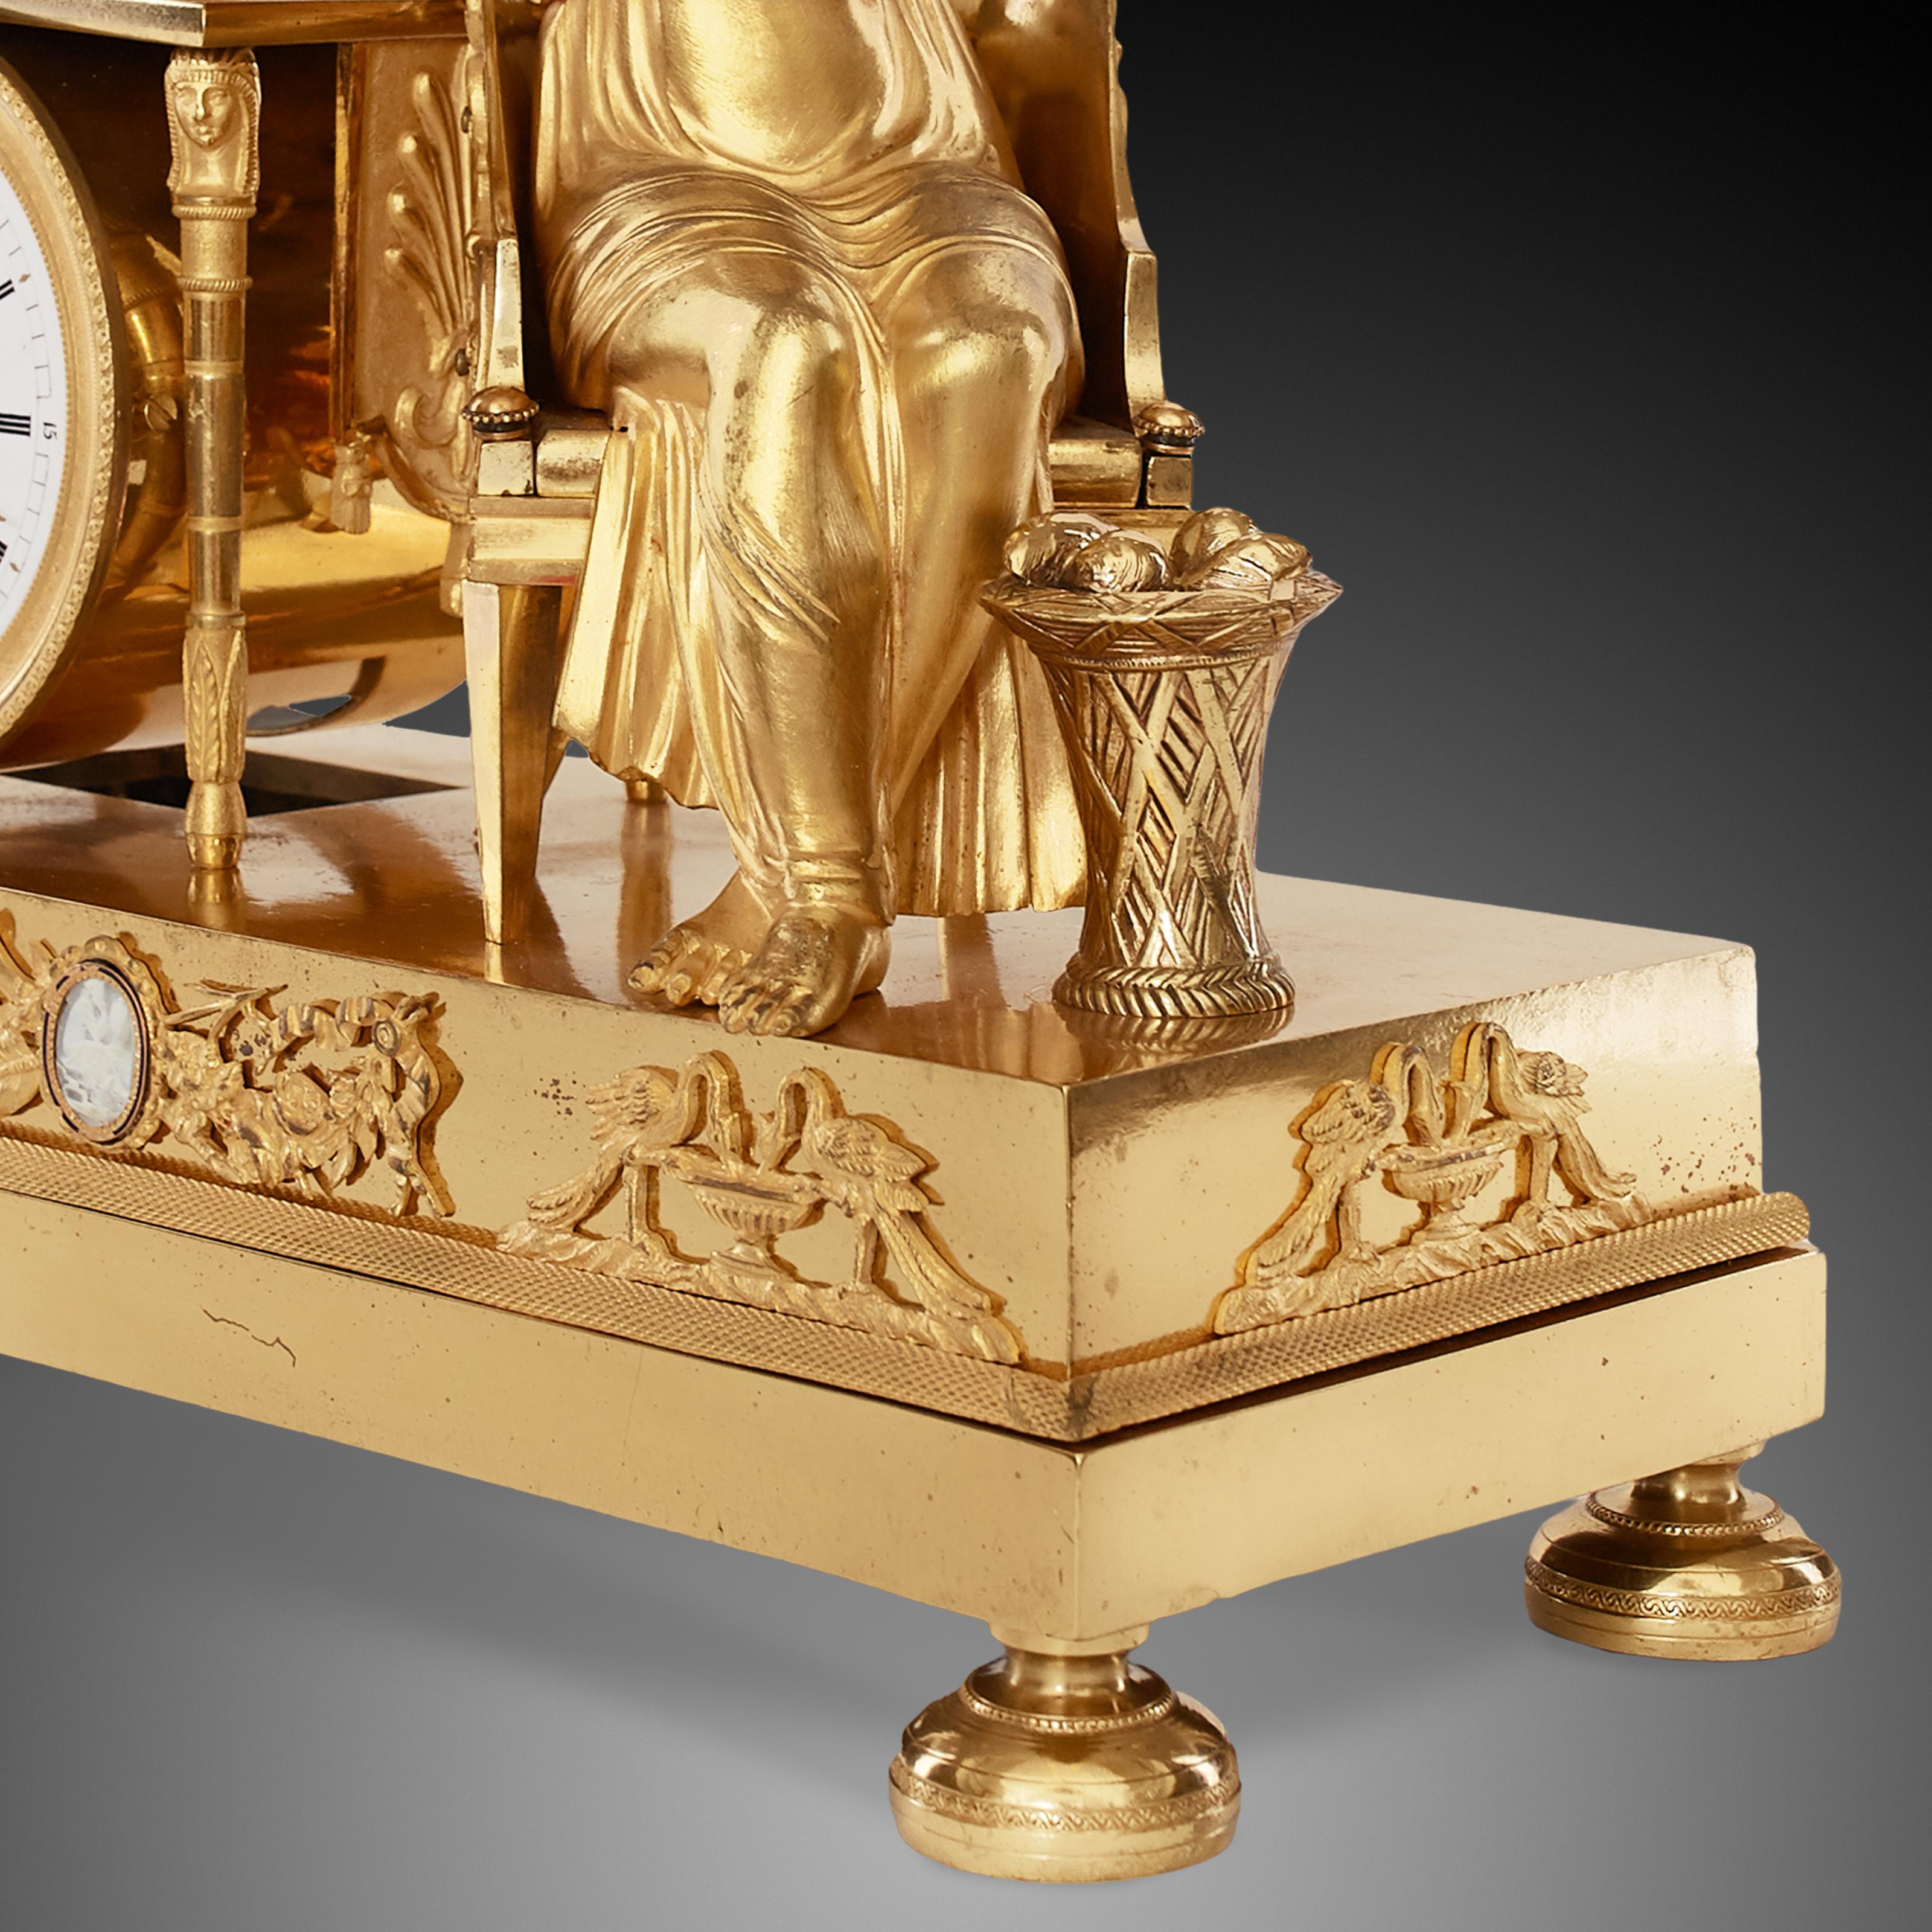 Mantel Clock 19th Century Styl Empire by Chaussee D'aulin À Paris For Sale 4